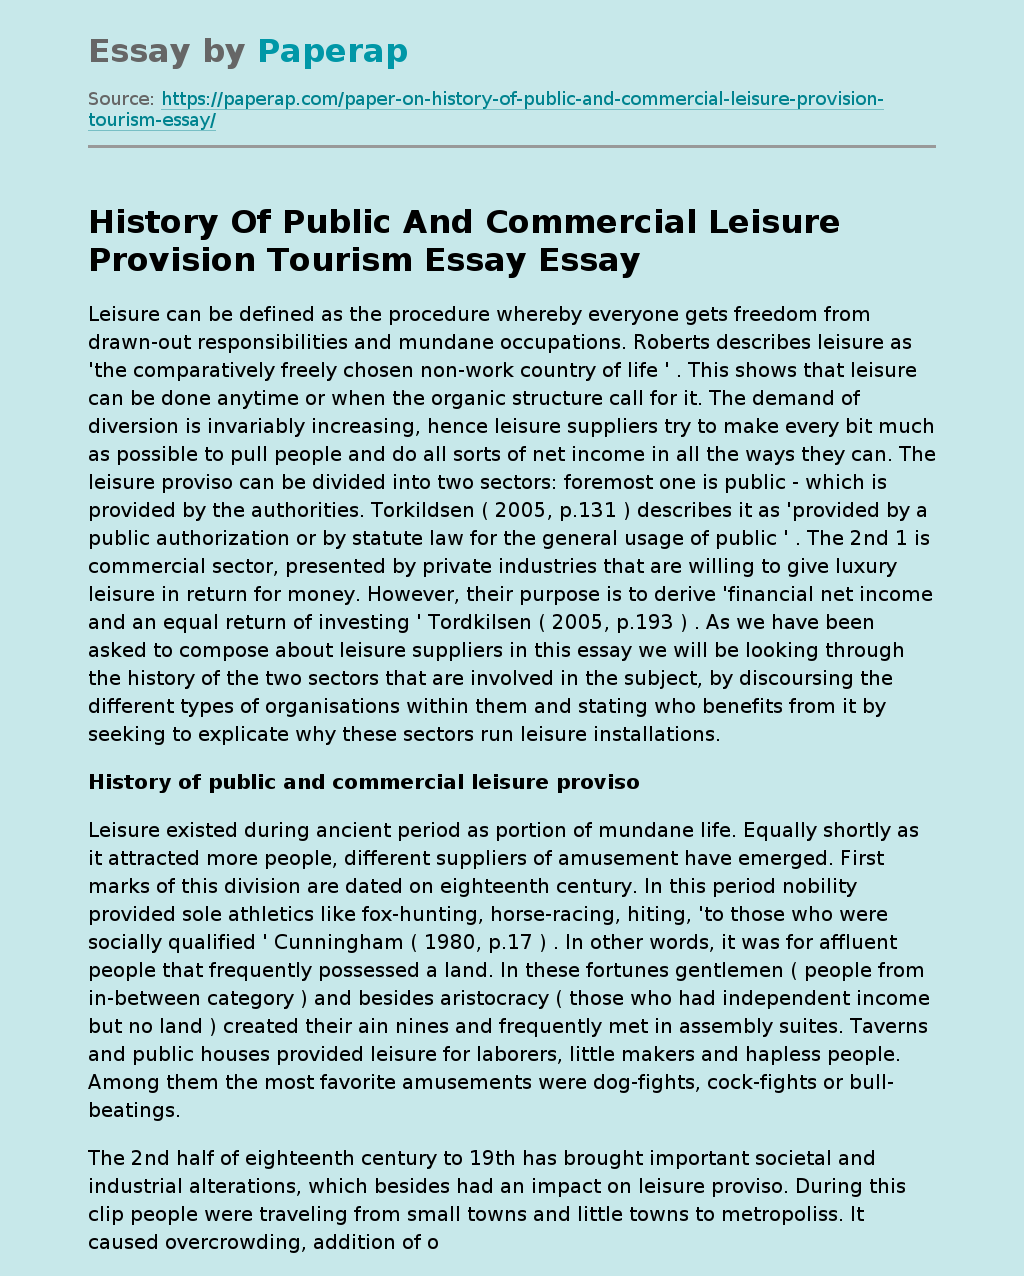 History Of Public And Commercial Leisure Provision Tourism Essay